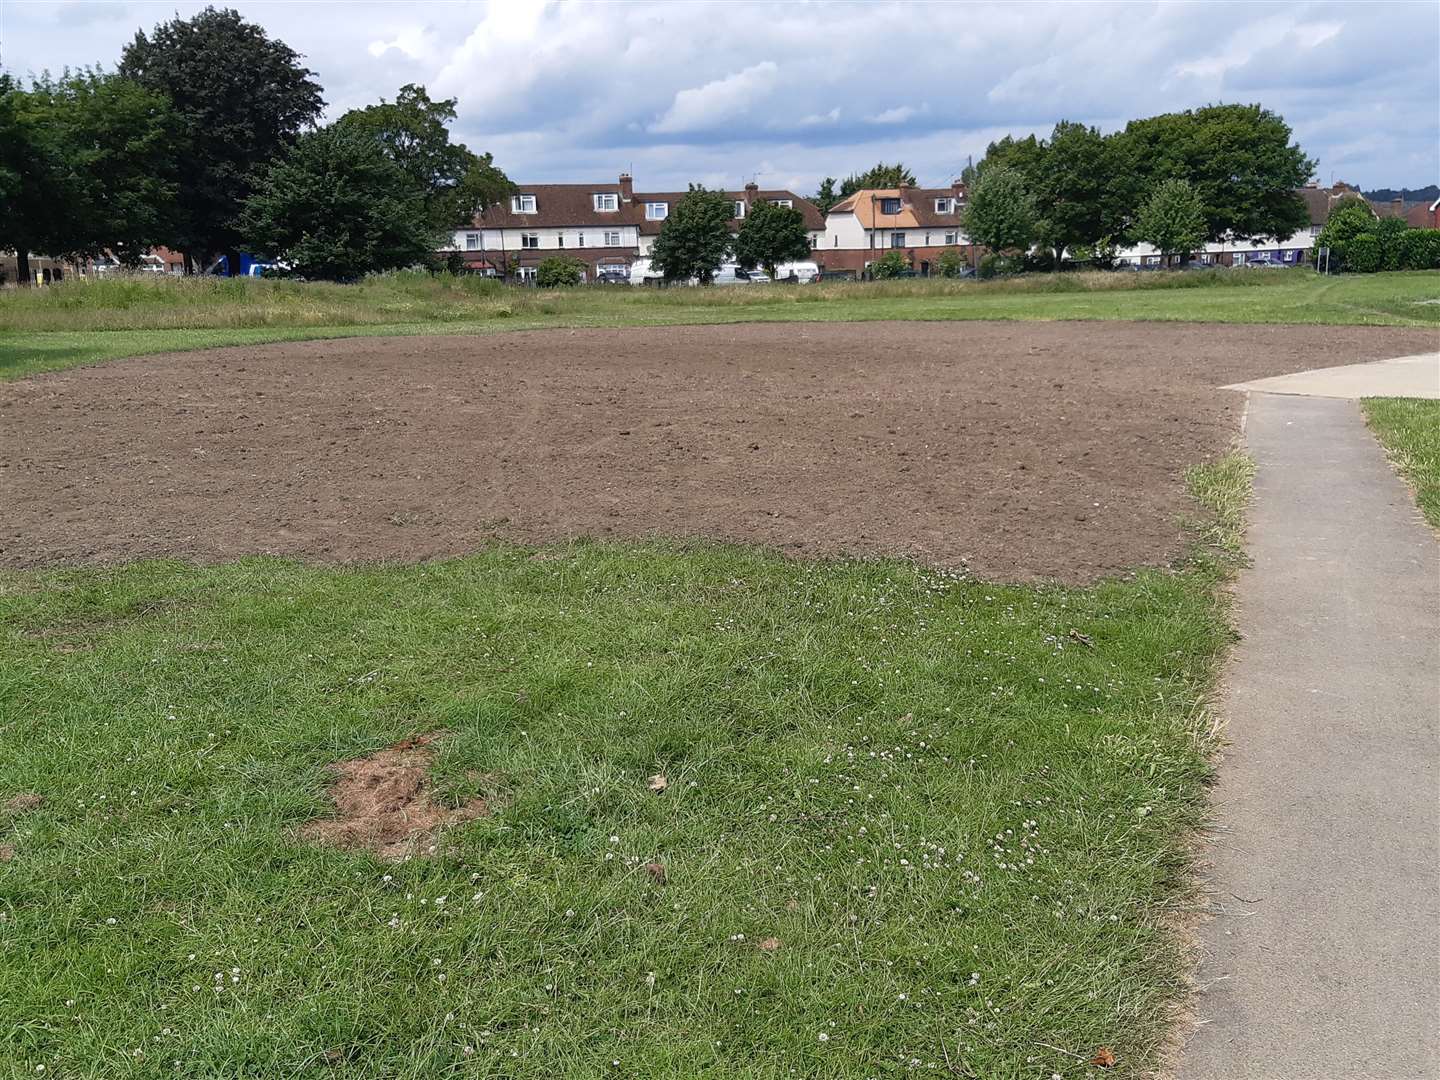 The skatebowl at South Park in Maidstone has been removed